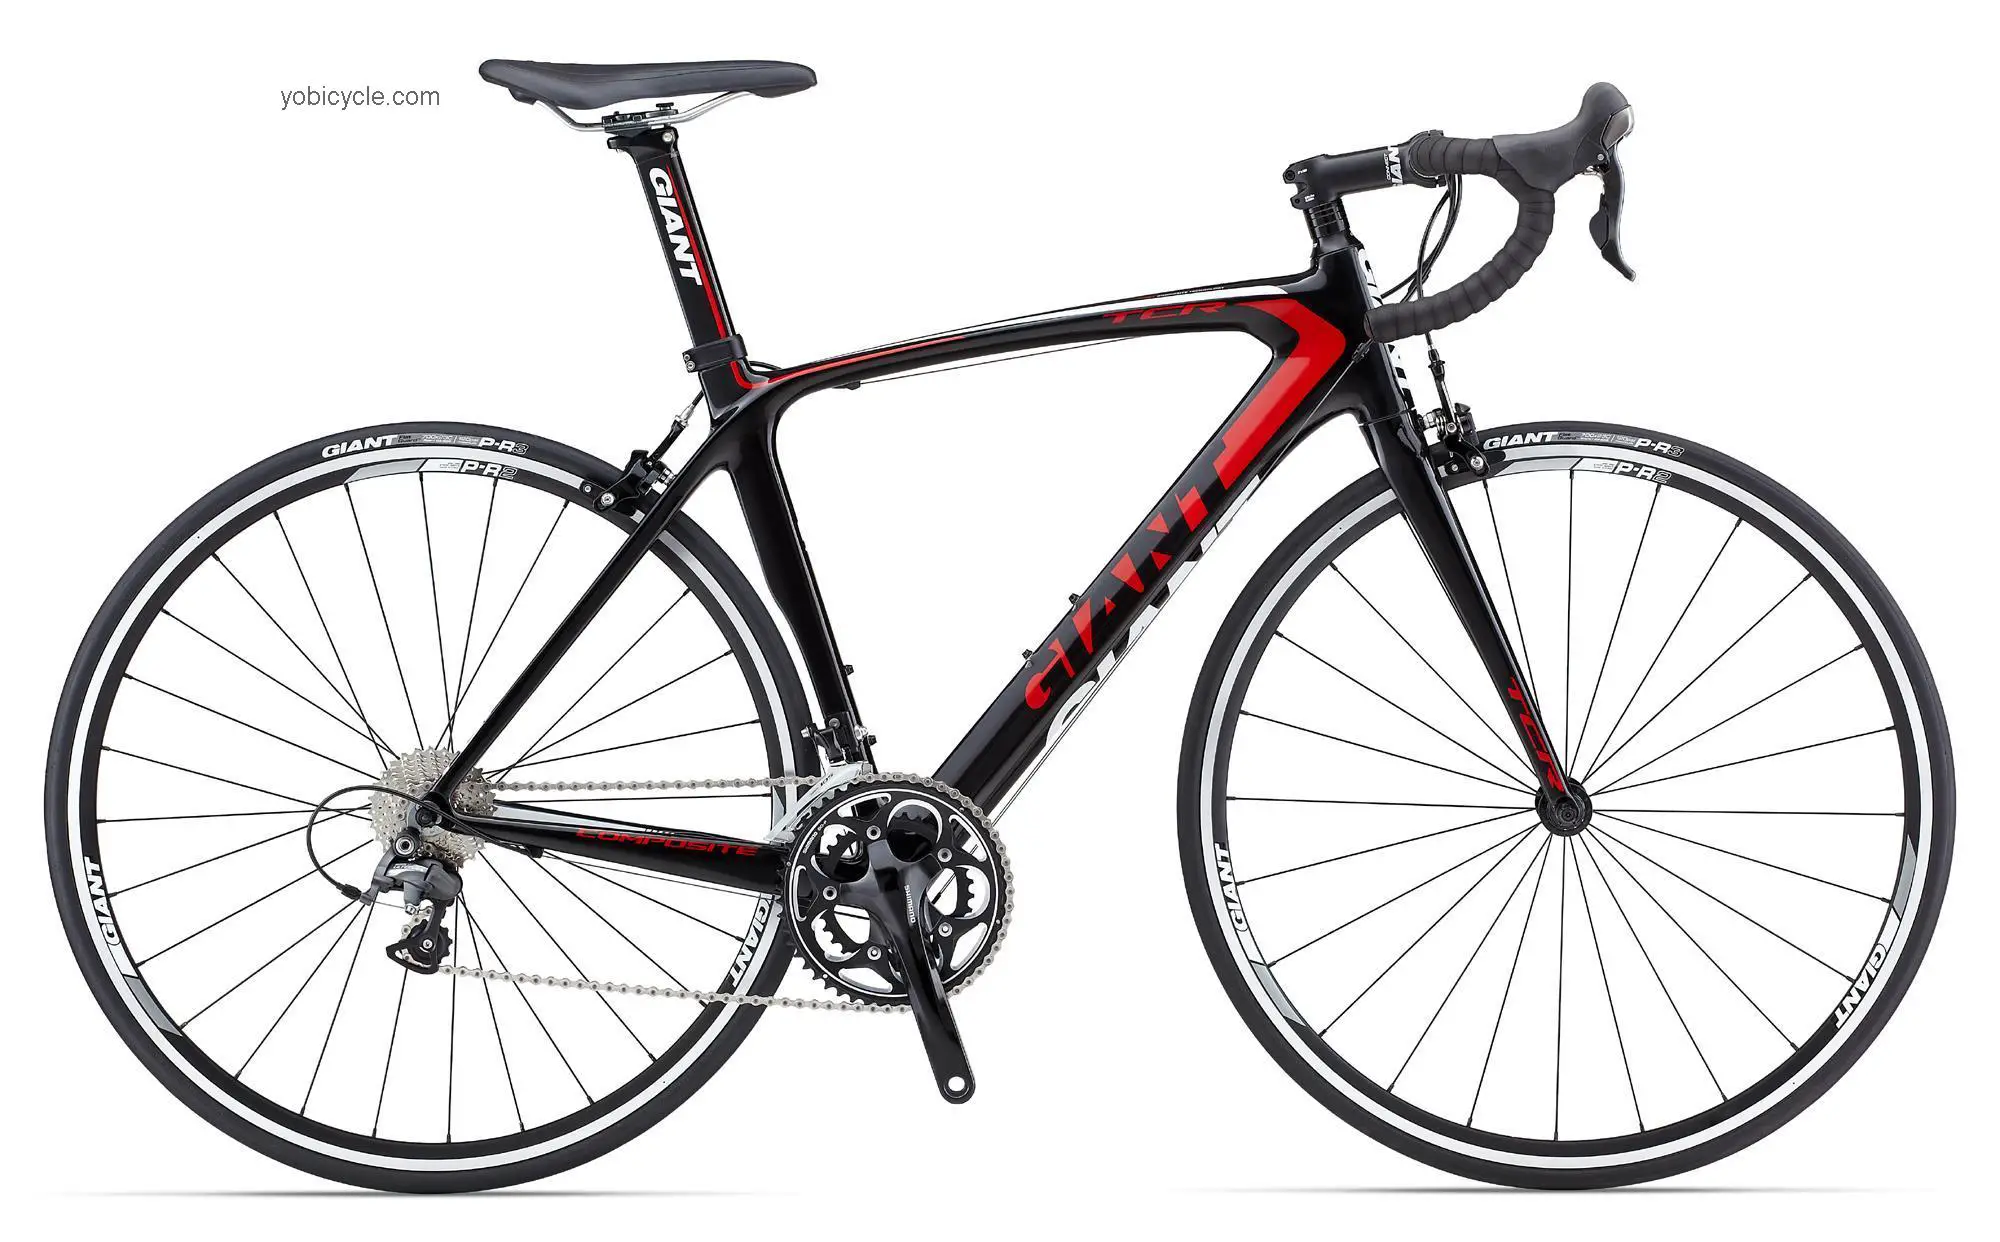 Giant TCR Composite 2 2013 comparison online with competitors